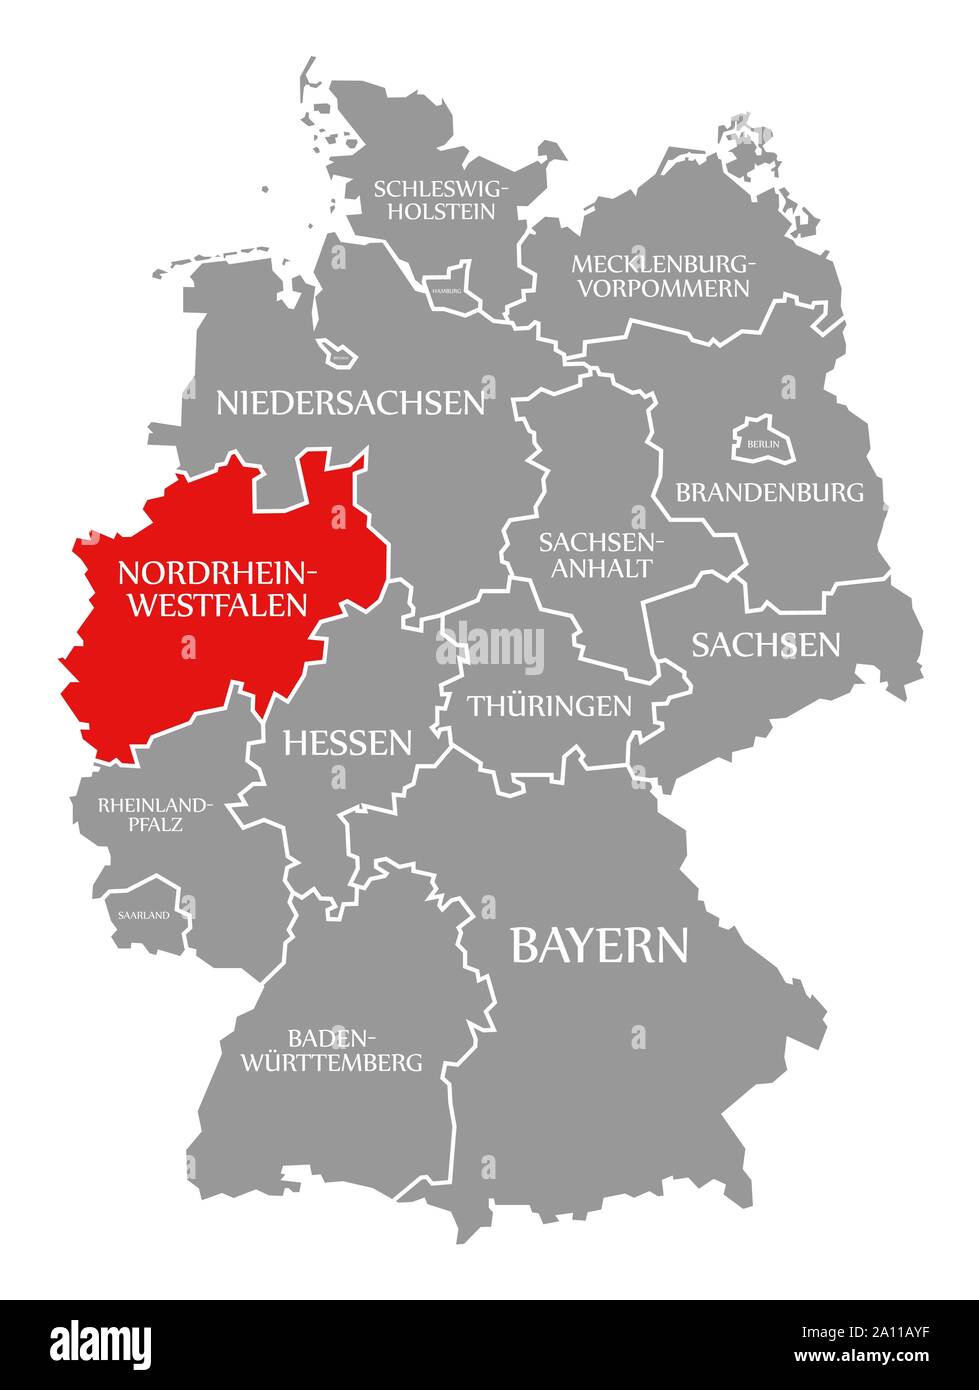 North Rhine Westphalia red highlighted in map of Germany Stock Photo